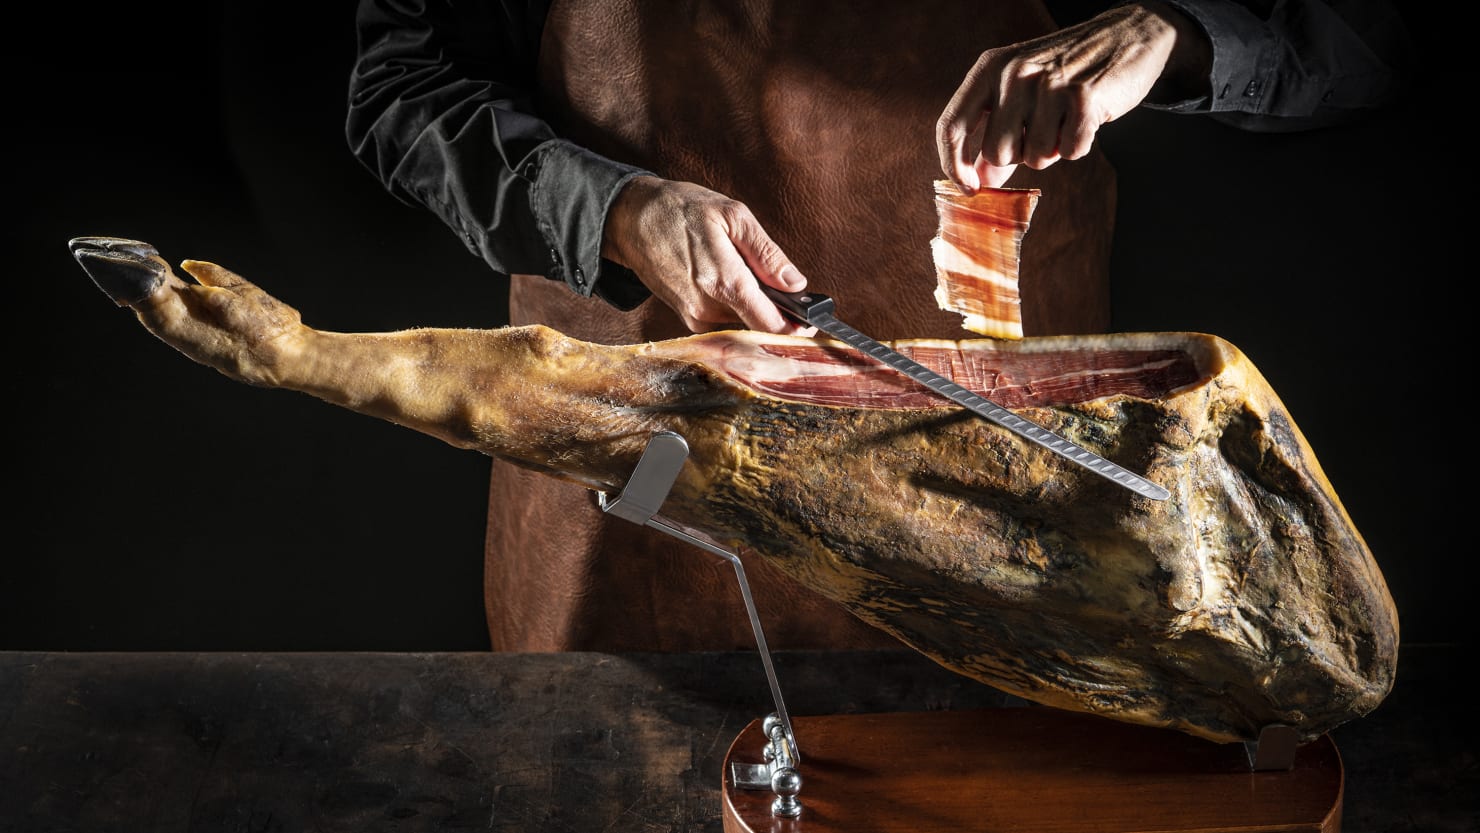 The Country With The World’s Best Ham Why Does Spain Have So Horrible Bacon?